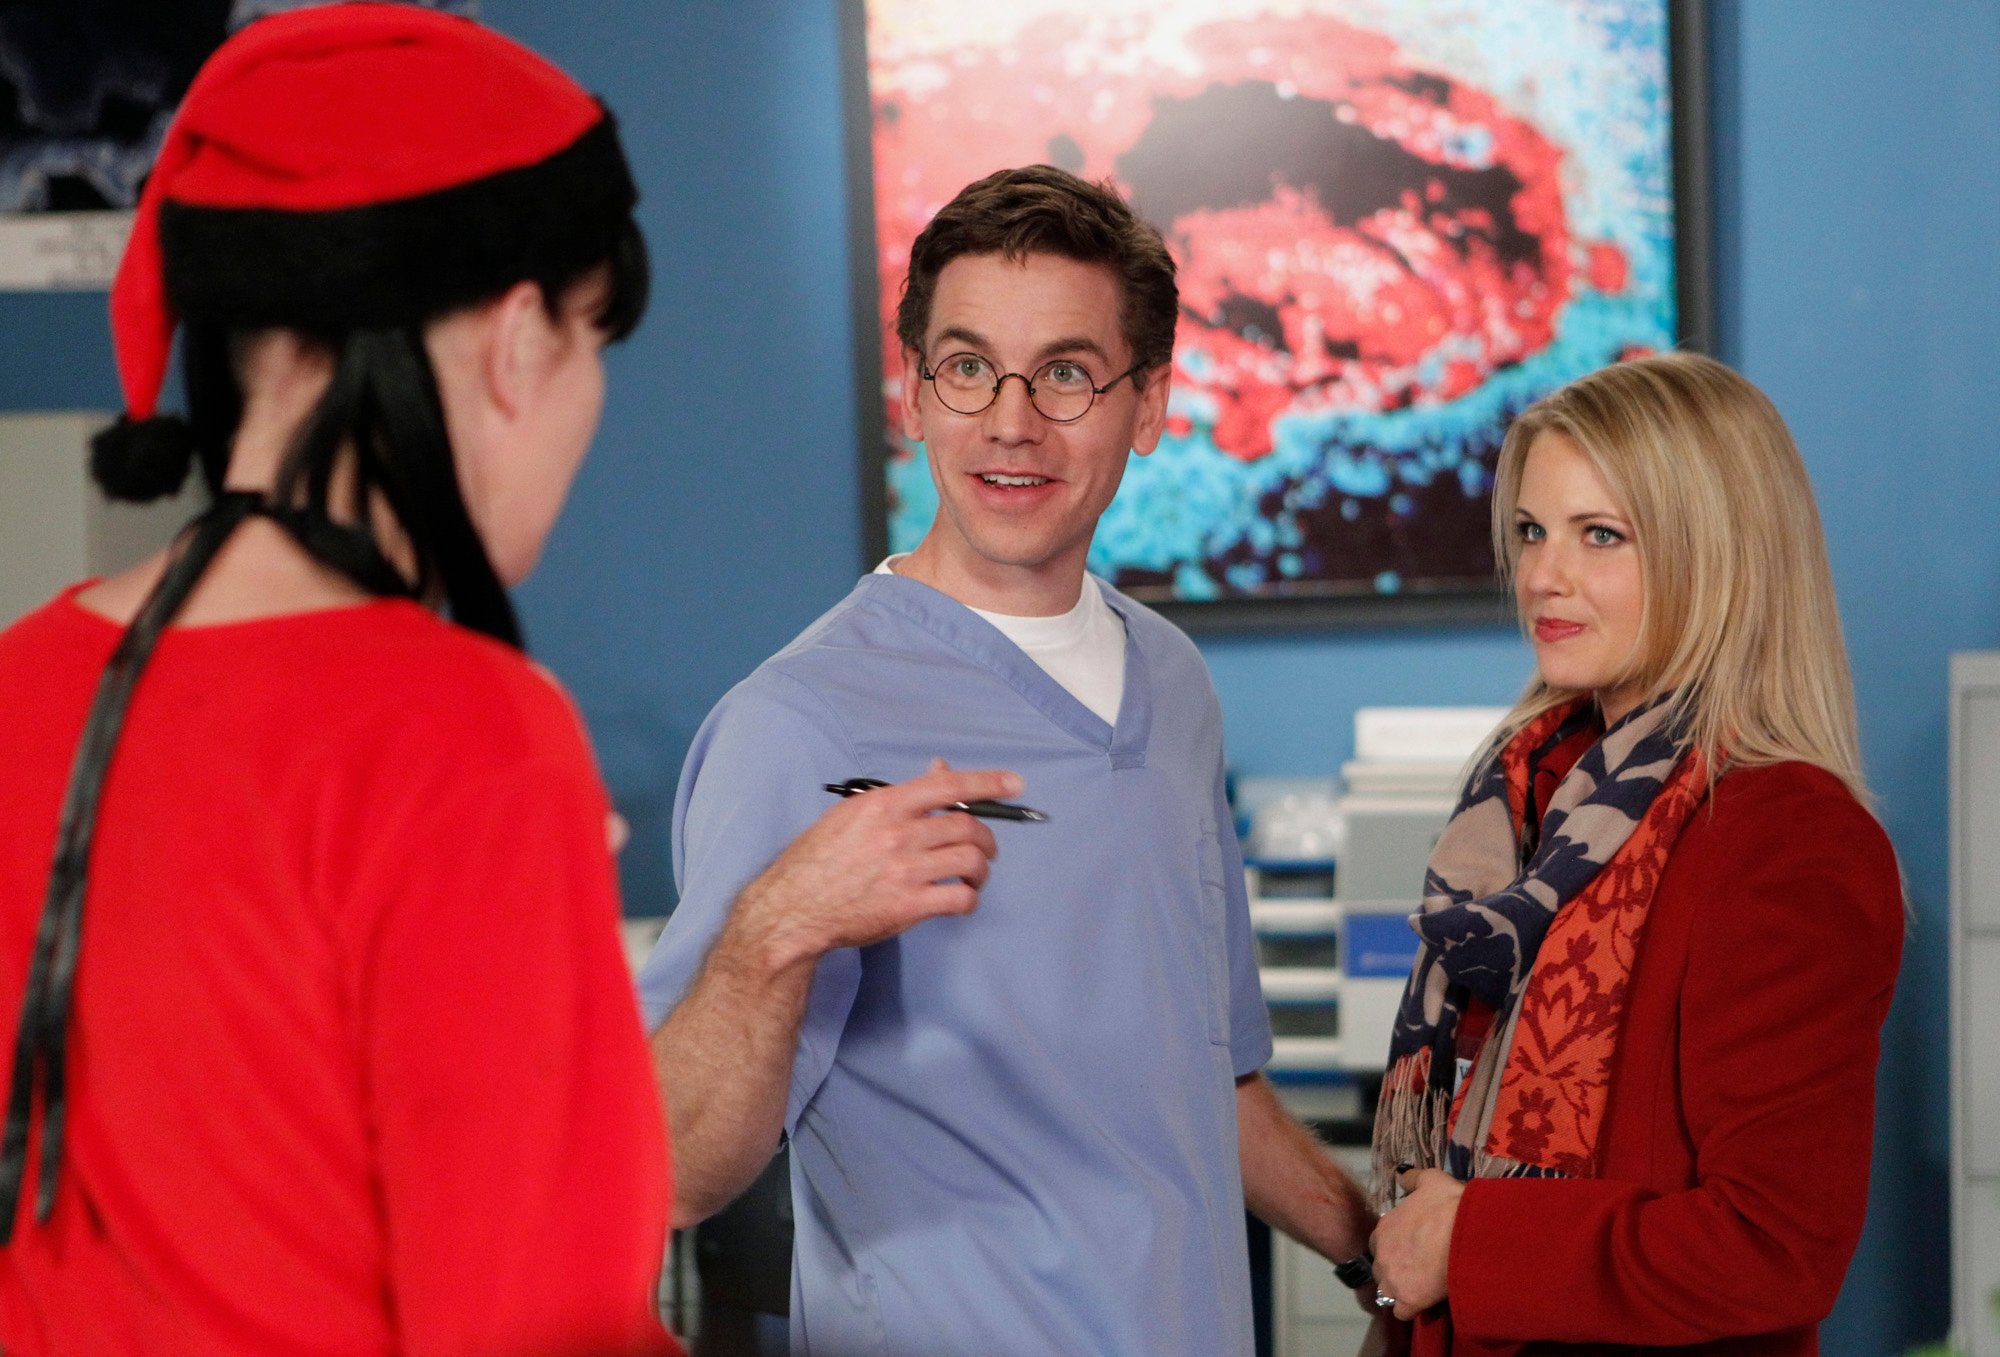 Pauley Perrette, Brian Dietzen, and Michelle Pierce on 'NCIS' | Sonja Flemming/CBS via Getty Images